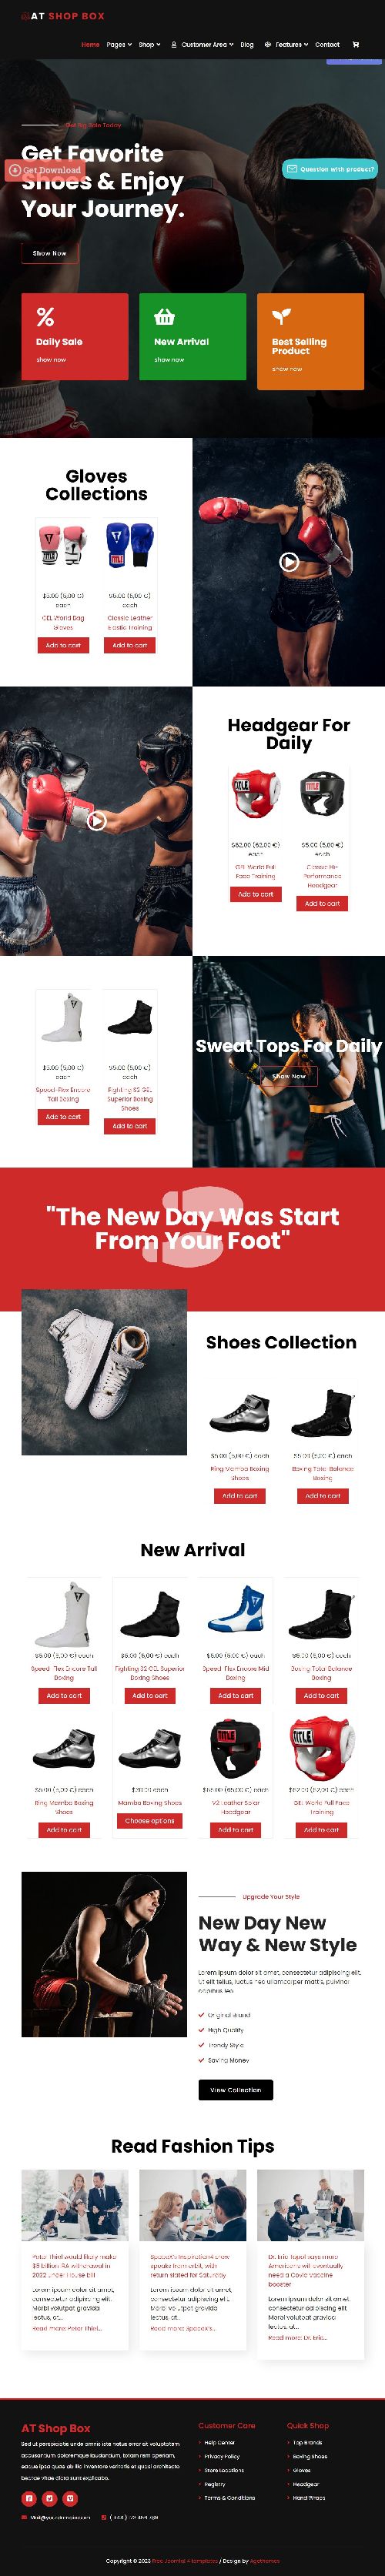 Shop Box - eCommerce Joomla Template for Boxing Products